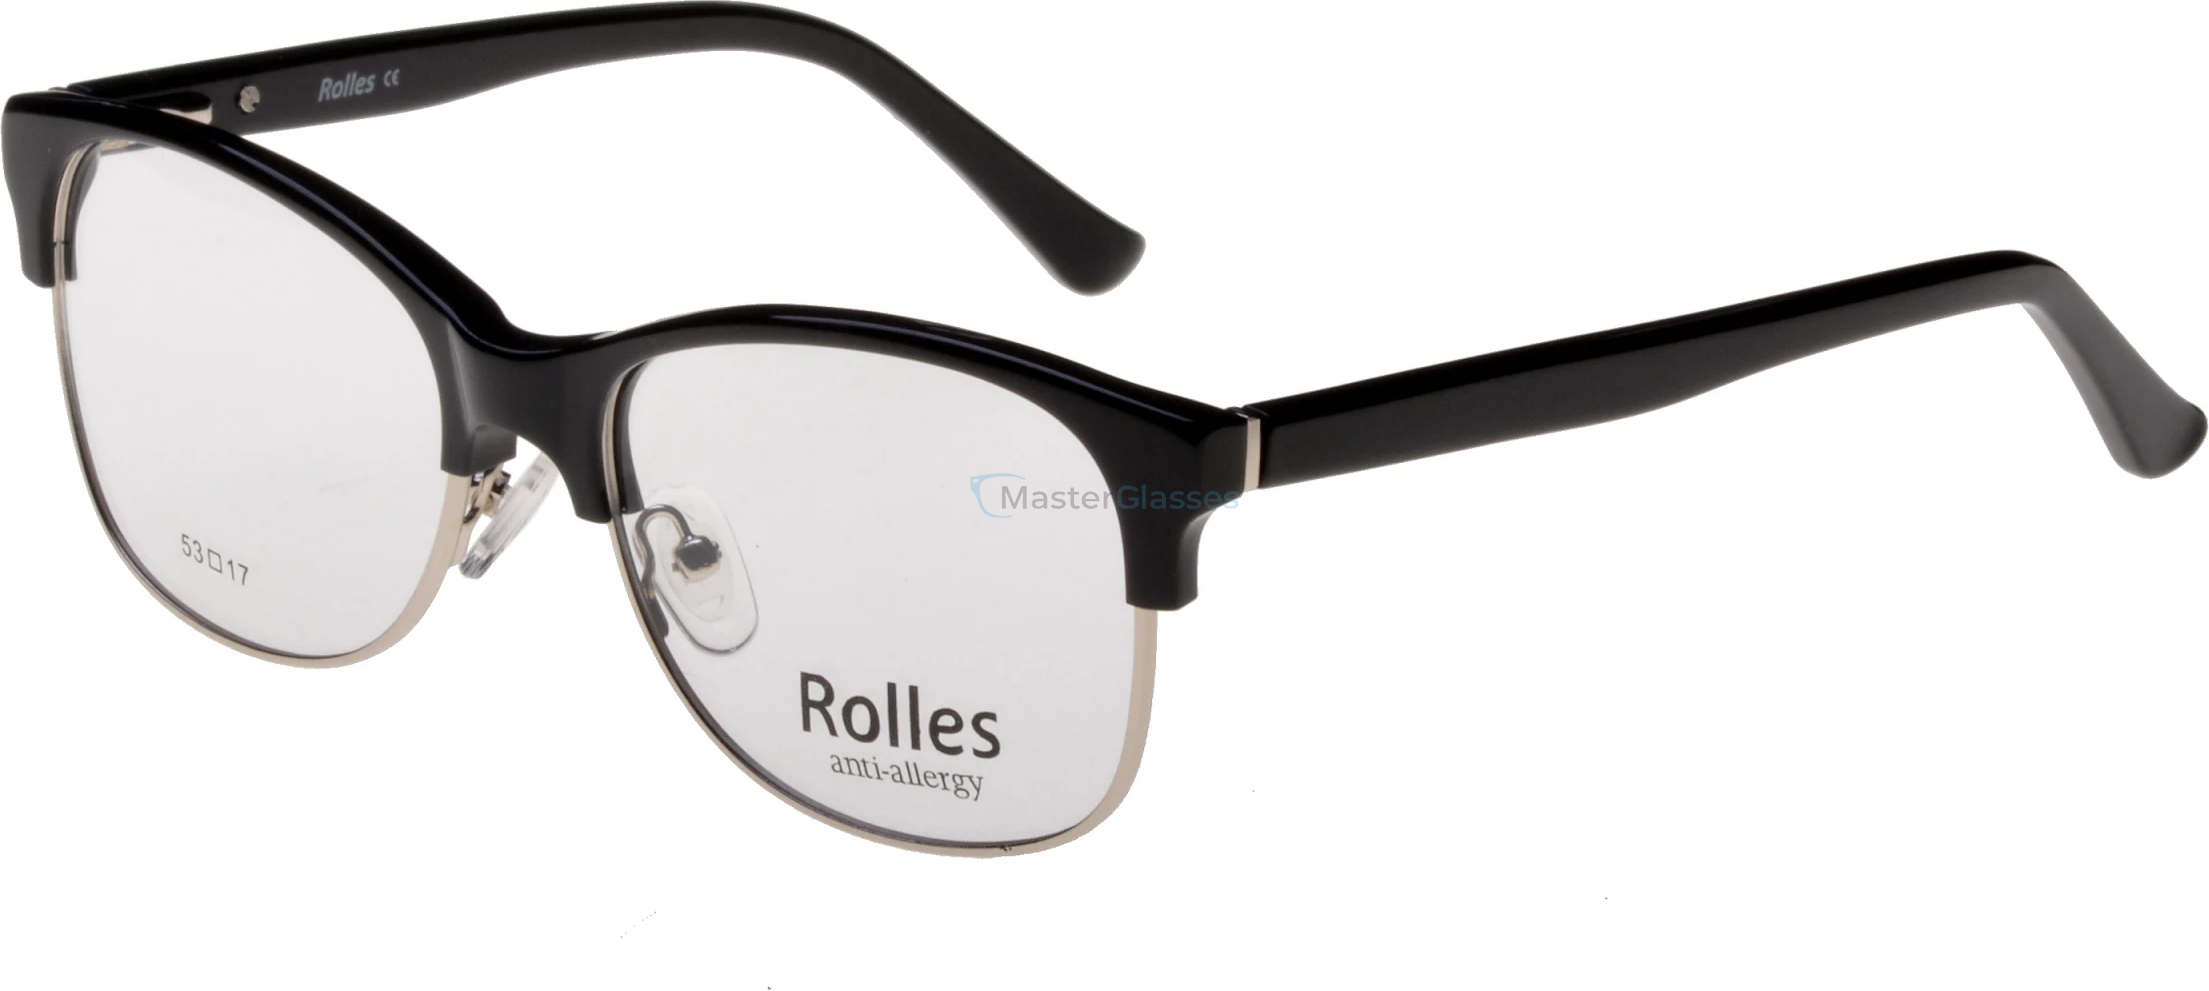  Rolles 1703 02